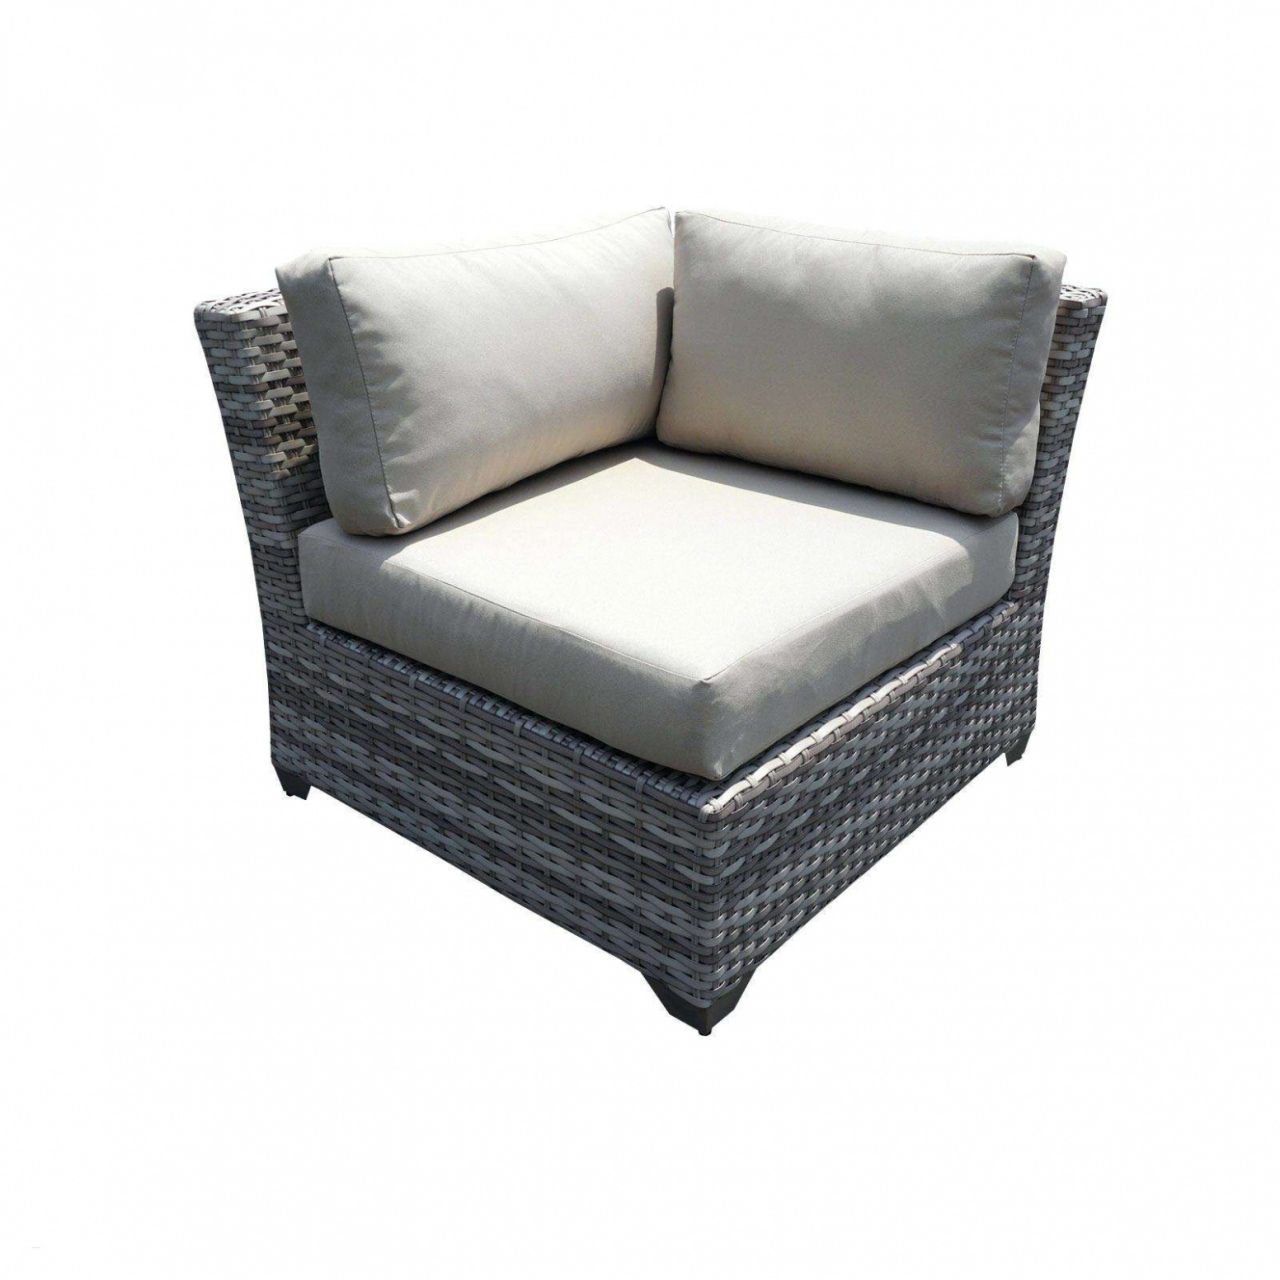 patio daybed couch discount luxus patio furniture daybed patio daybed 0d kimya durch patio daybed